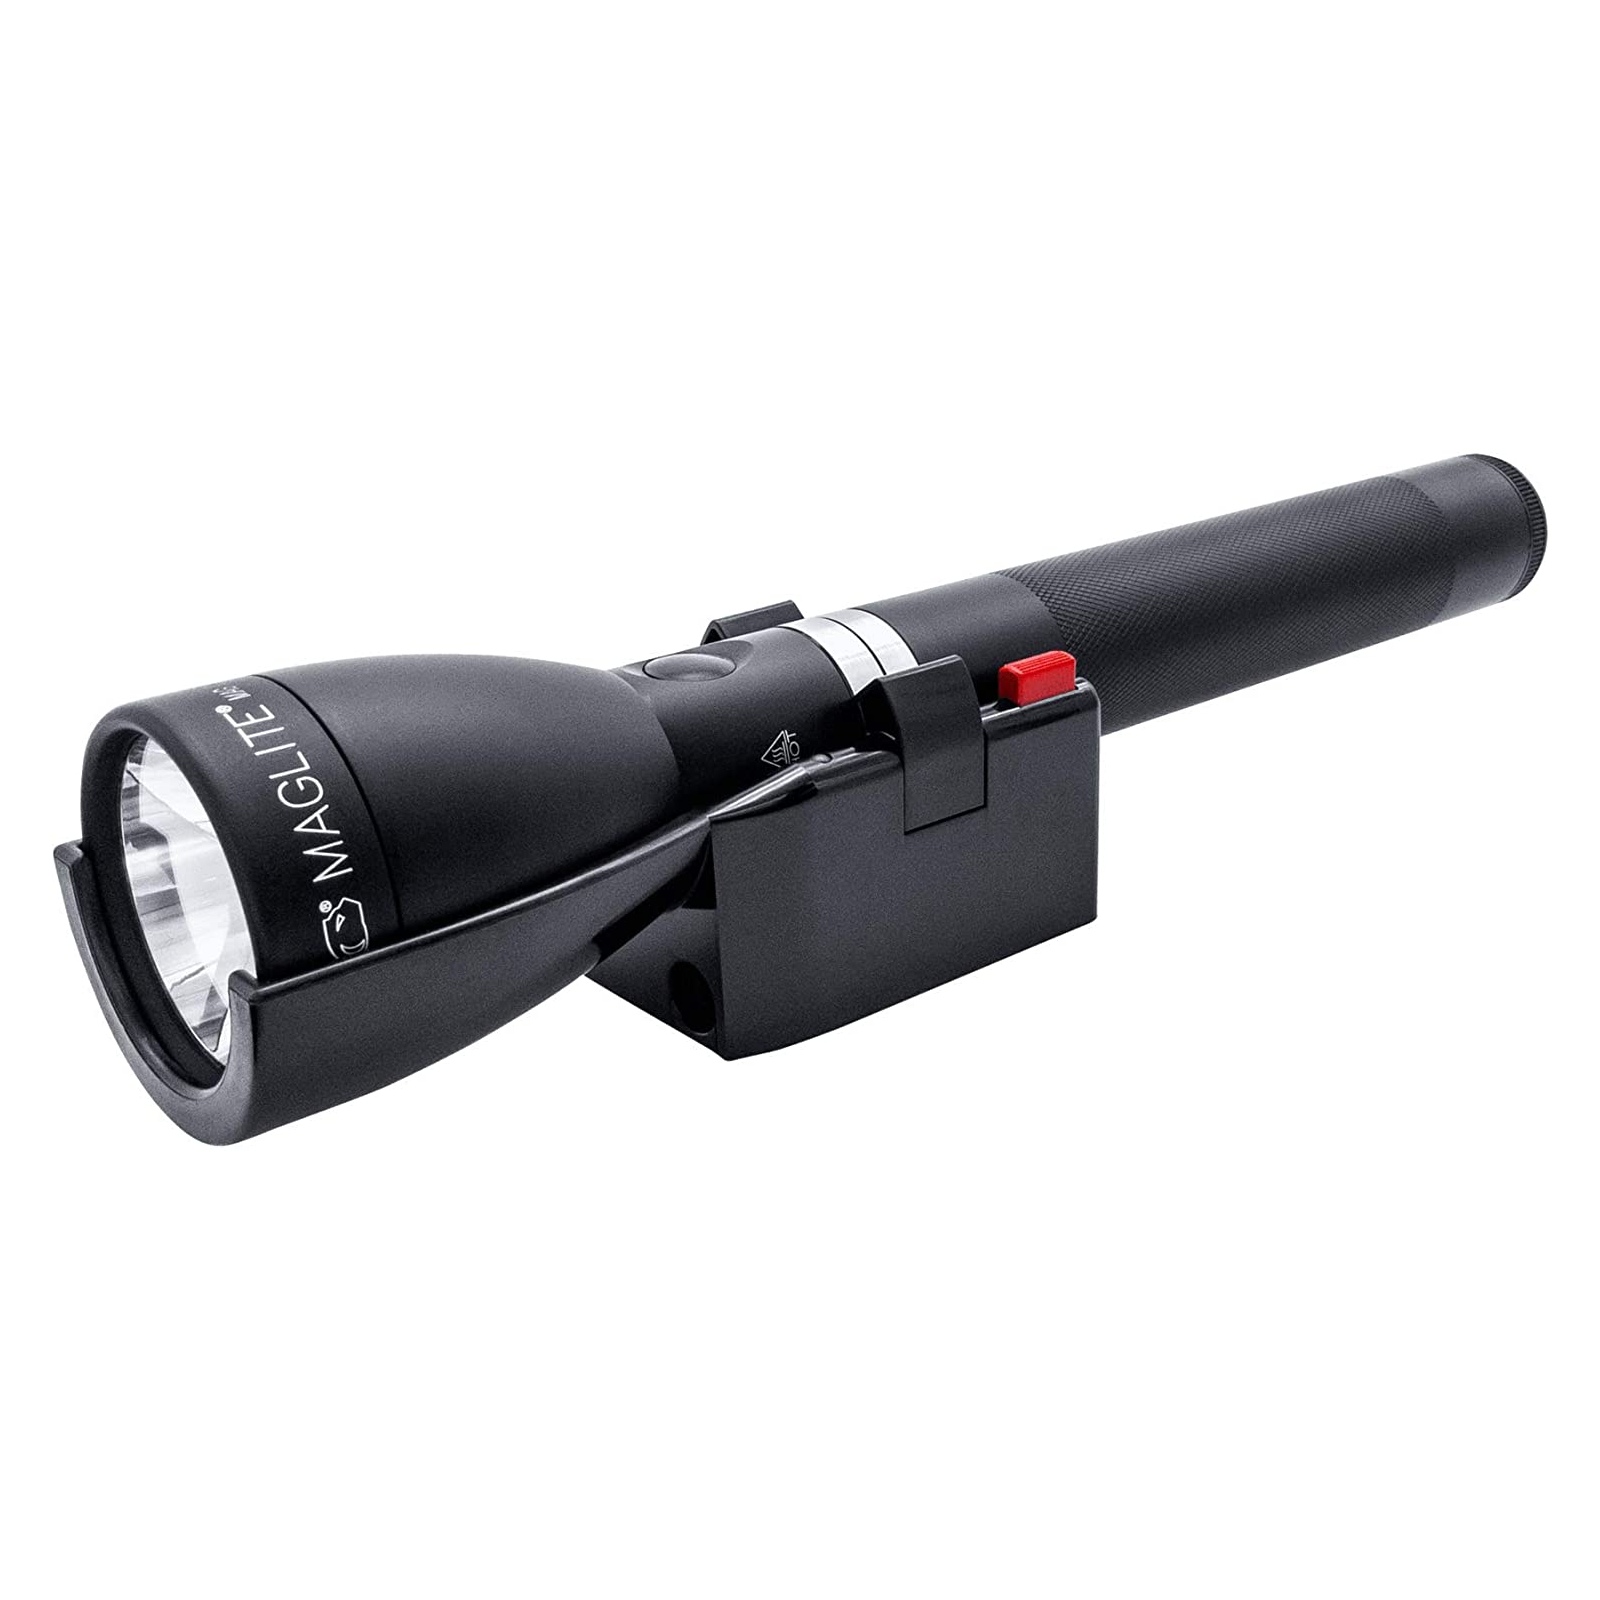 Maglite ML150LRX System 4 - Rechargeable LED torch IPX4 - 1082 lumen fast charge - official Maglite stockist